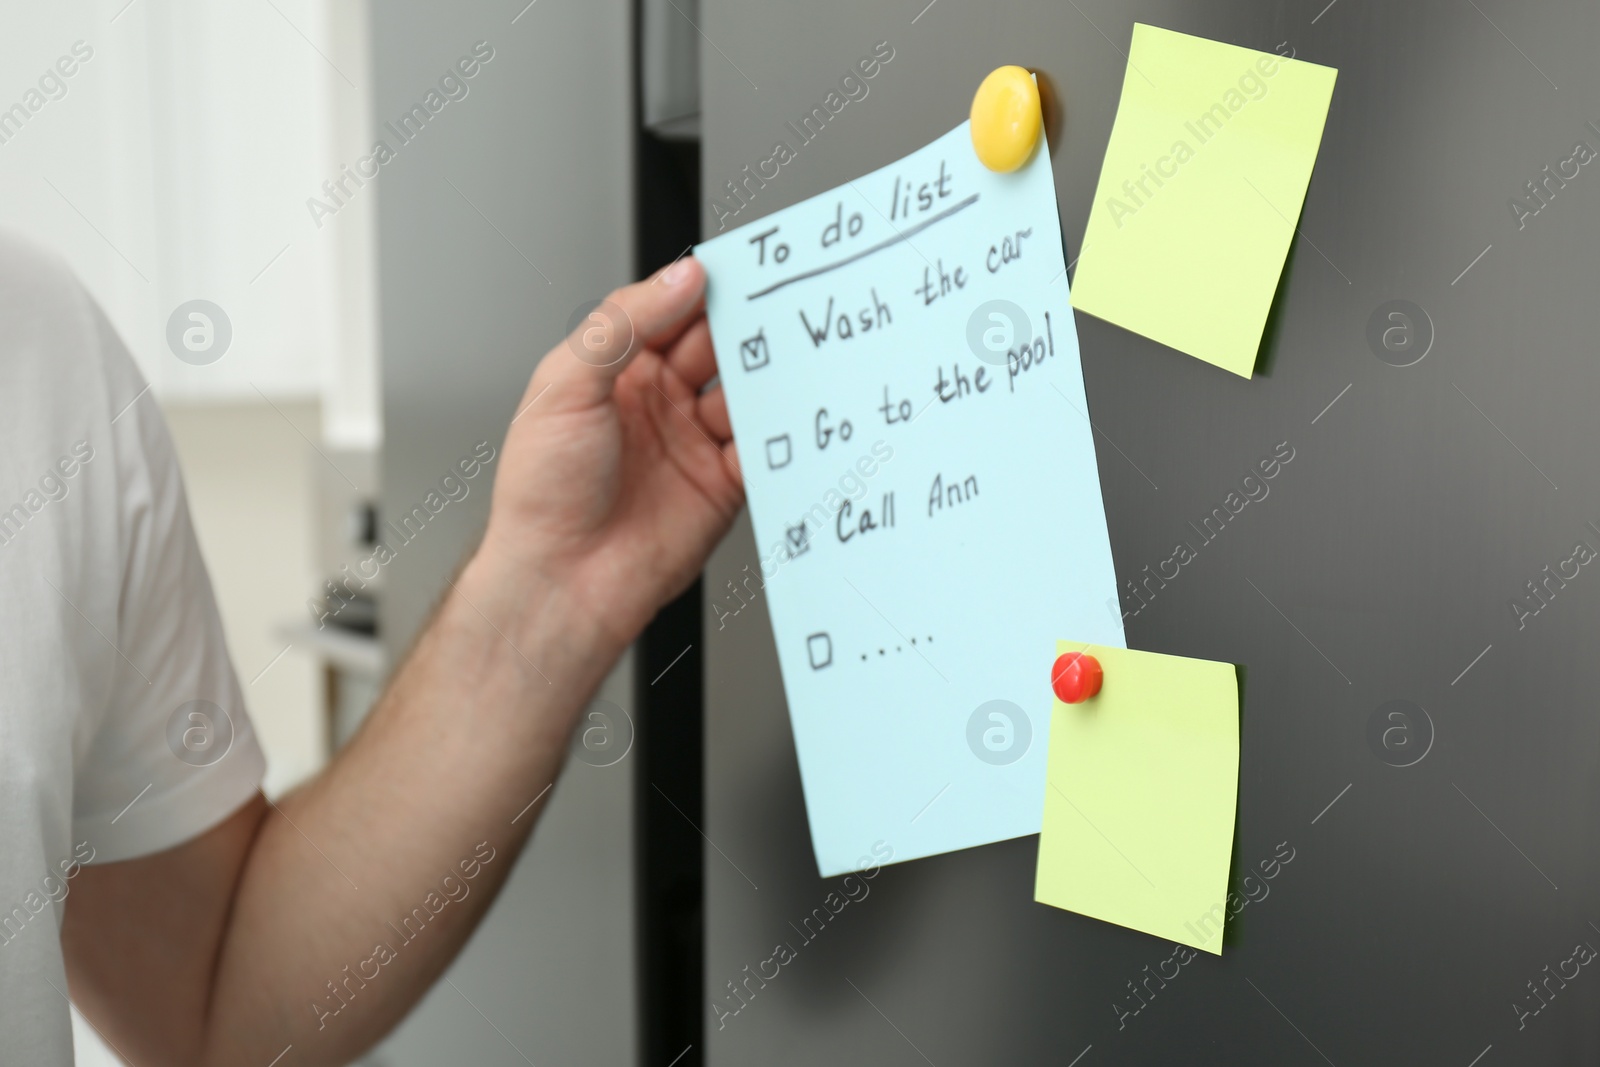 Photo of Man taking to do list from refrigerator door in kitchen, closeup